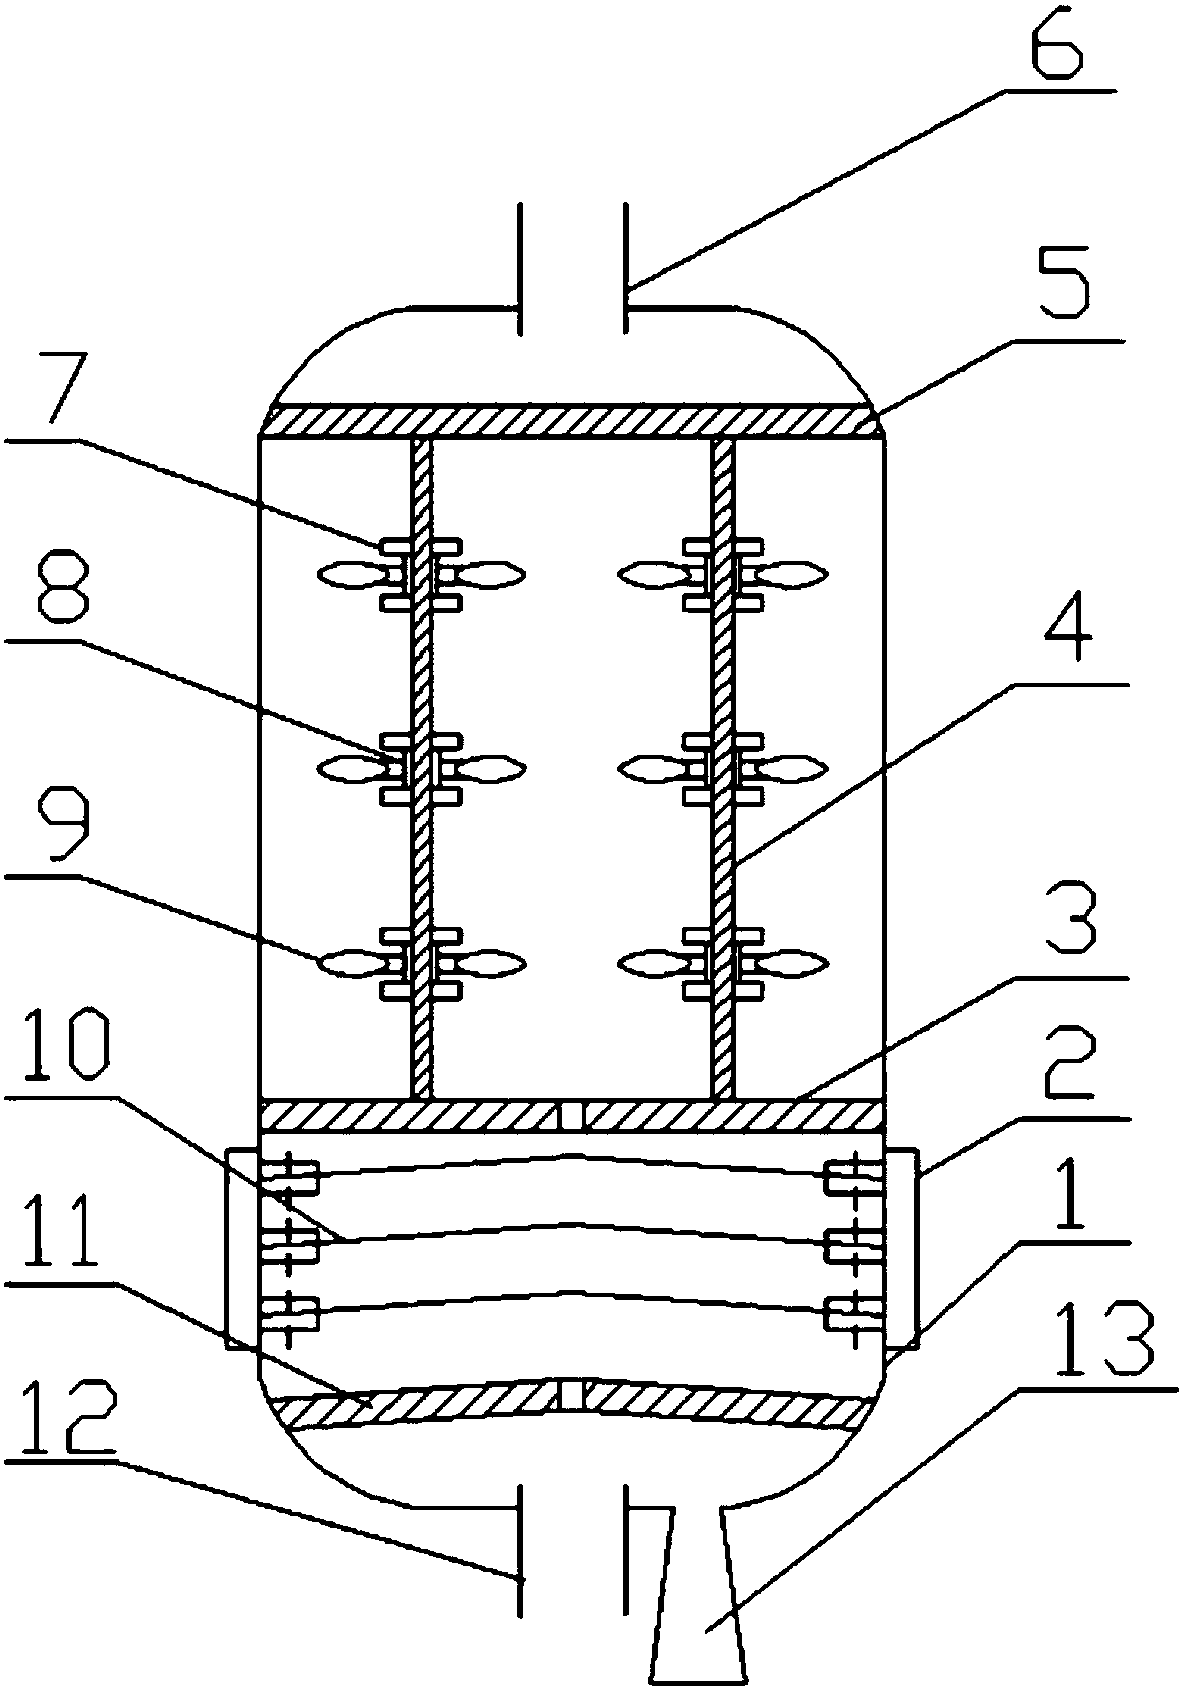 High-efficiency tubular heat exchanger device based on surface modification and heat exchange system